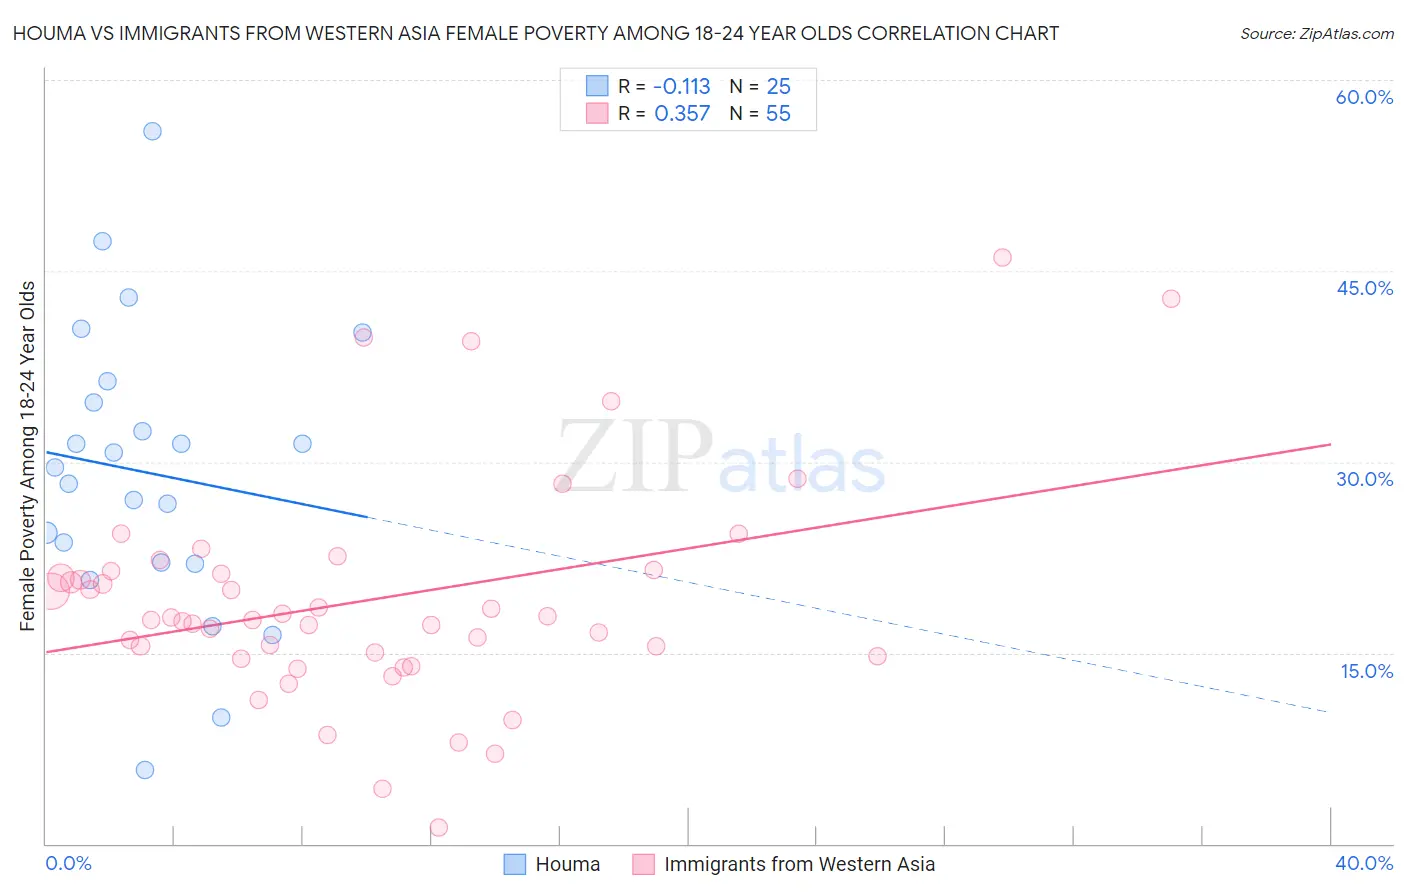 Houma vs Immigrants from Western Asia Female Poverty Among 18-24 Year Olds